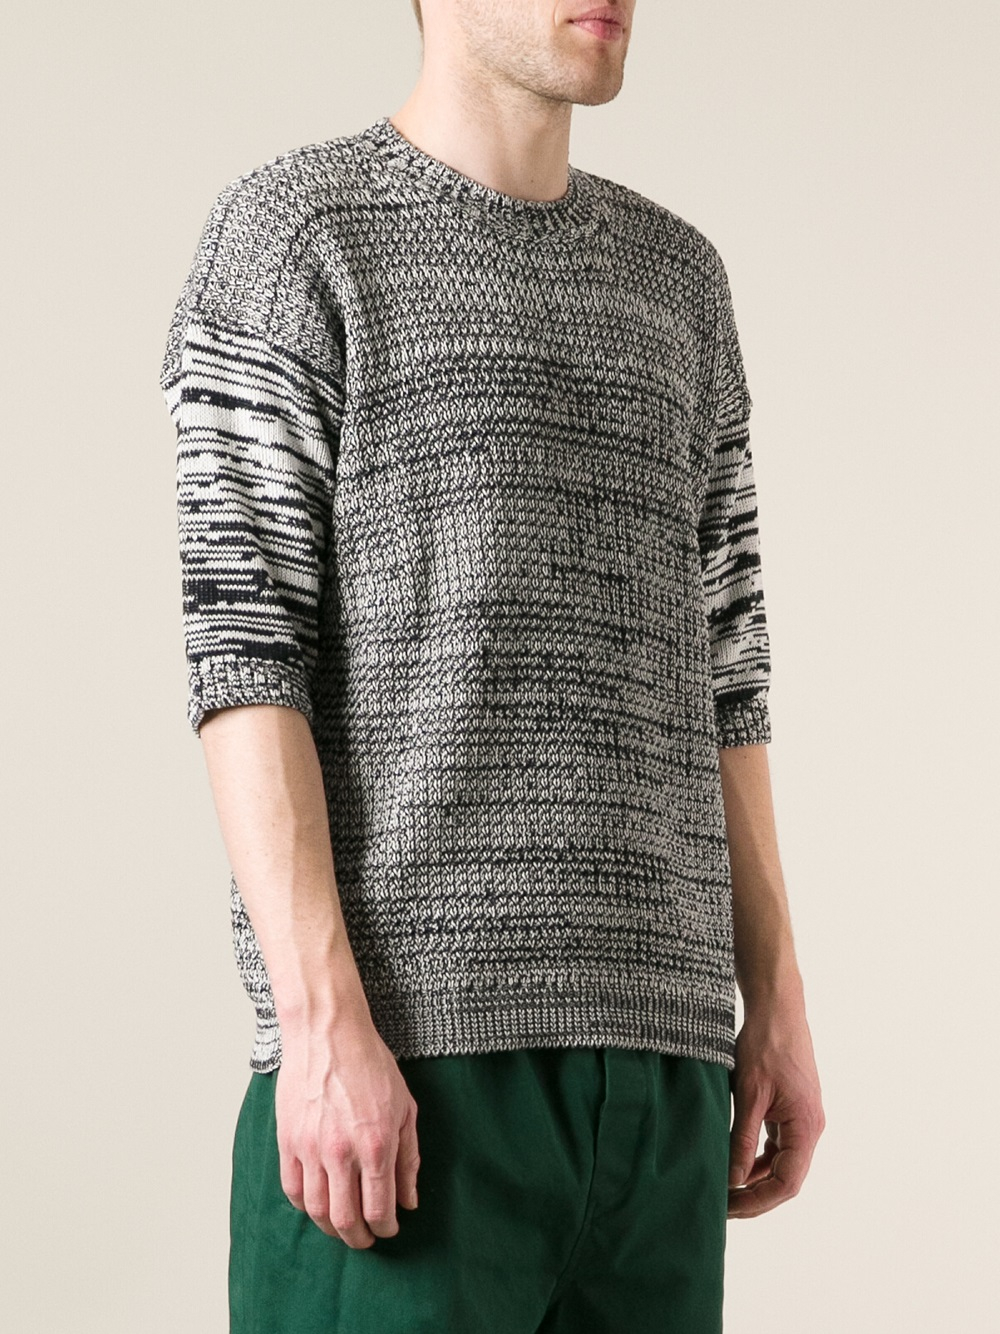 Marni Knitted Pattern Sweater in Black for Men - Lyst